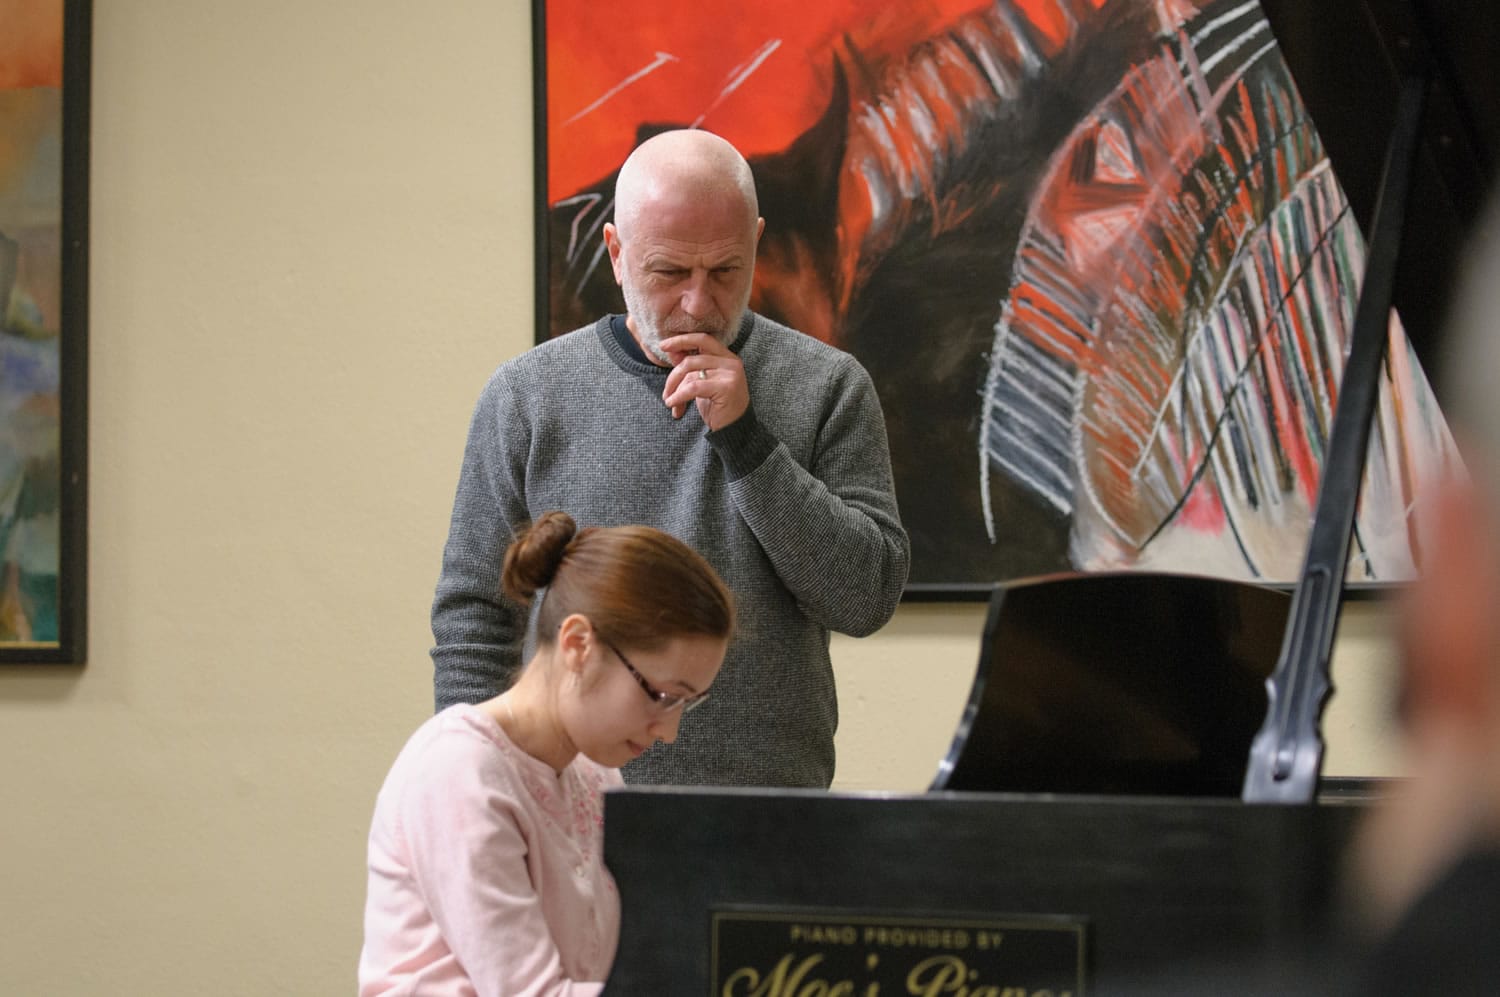 Camas: Camas resident and pianist Natalie Burton gets expert advice from Vladimir Feltsman during Portland Piano International's &quot;Up Close with the Masters&quot; education session on Jan.